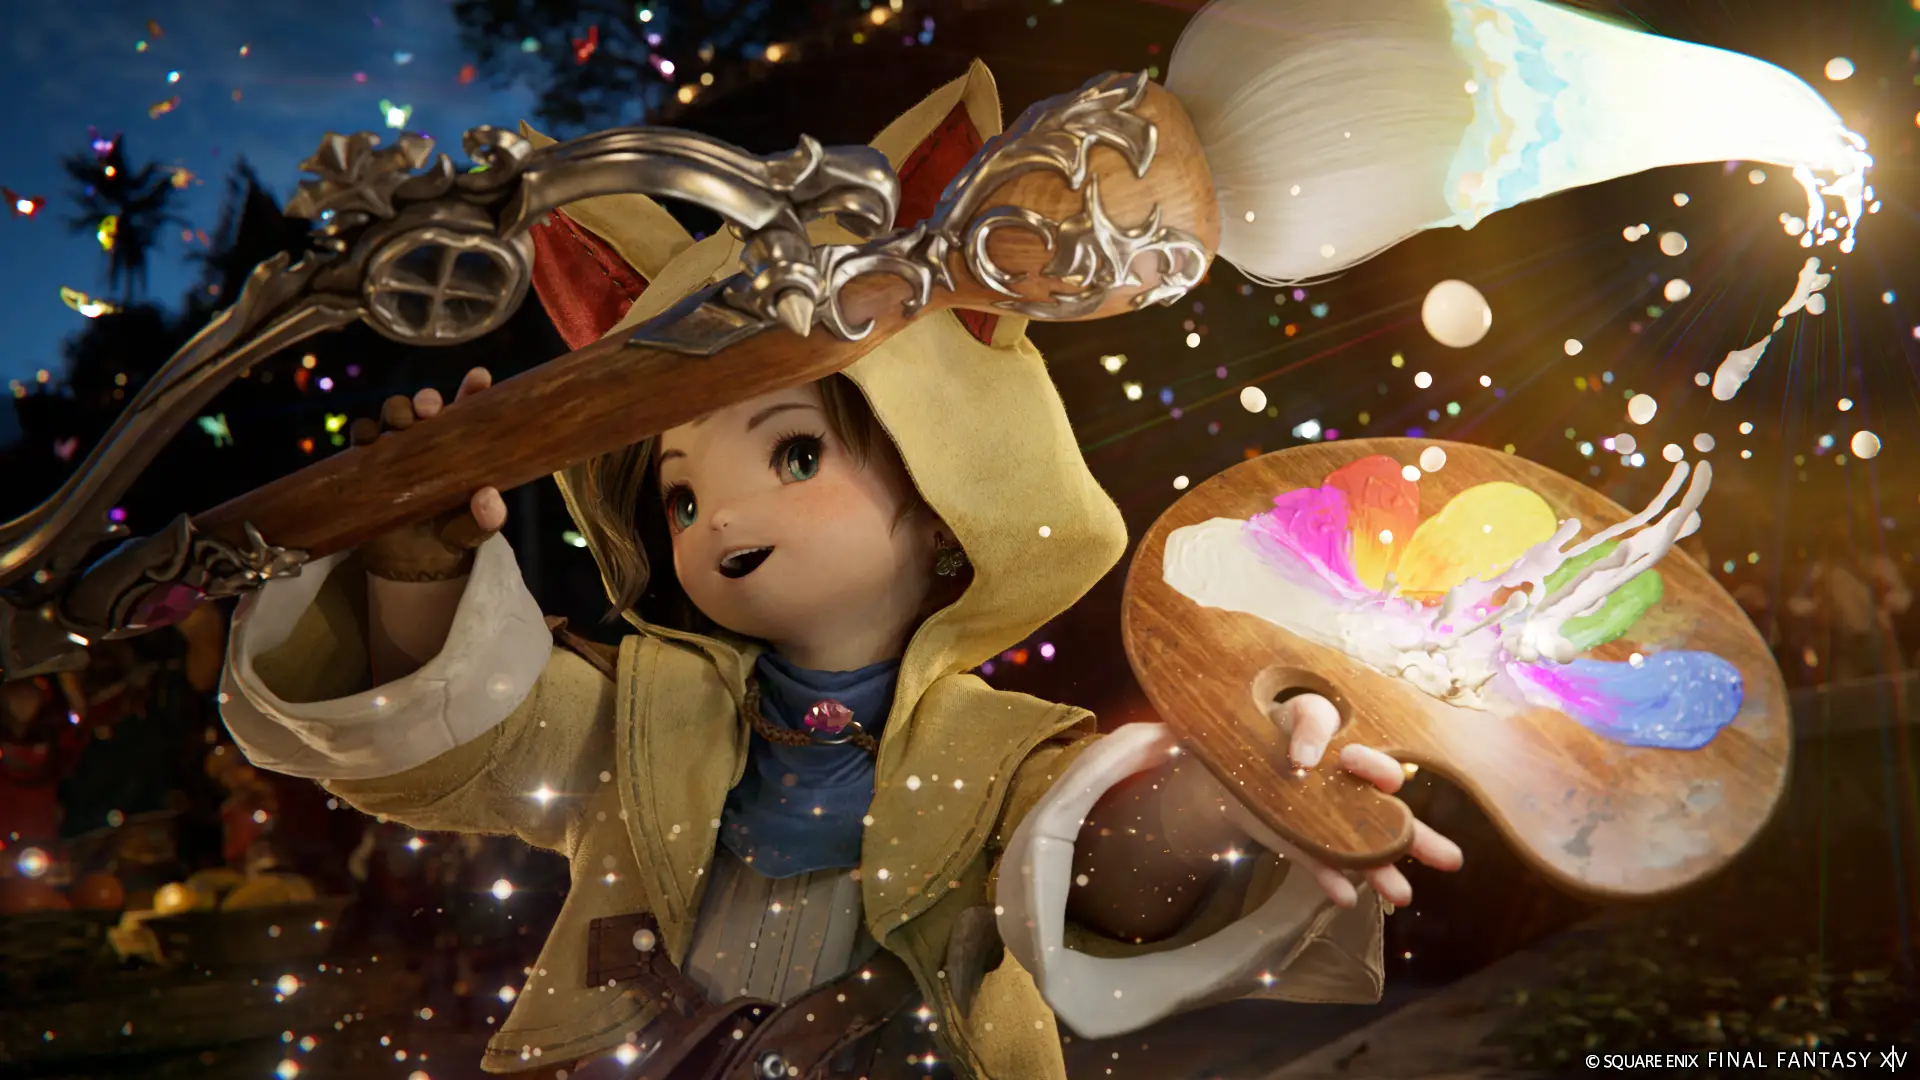 Final Fantasy XIV Reveals Patch 6.57 Notes; Removal of Instanced Areas & Tomestone Cap Increase